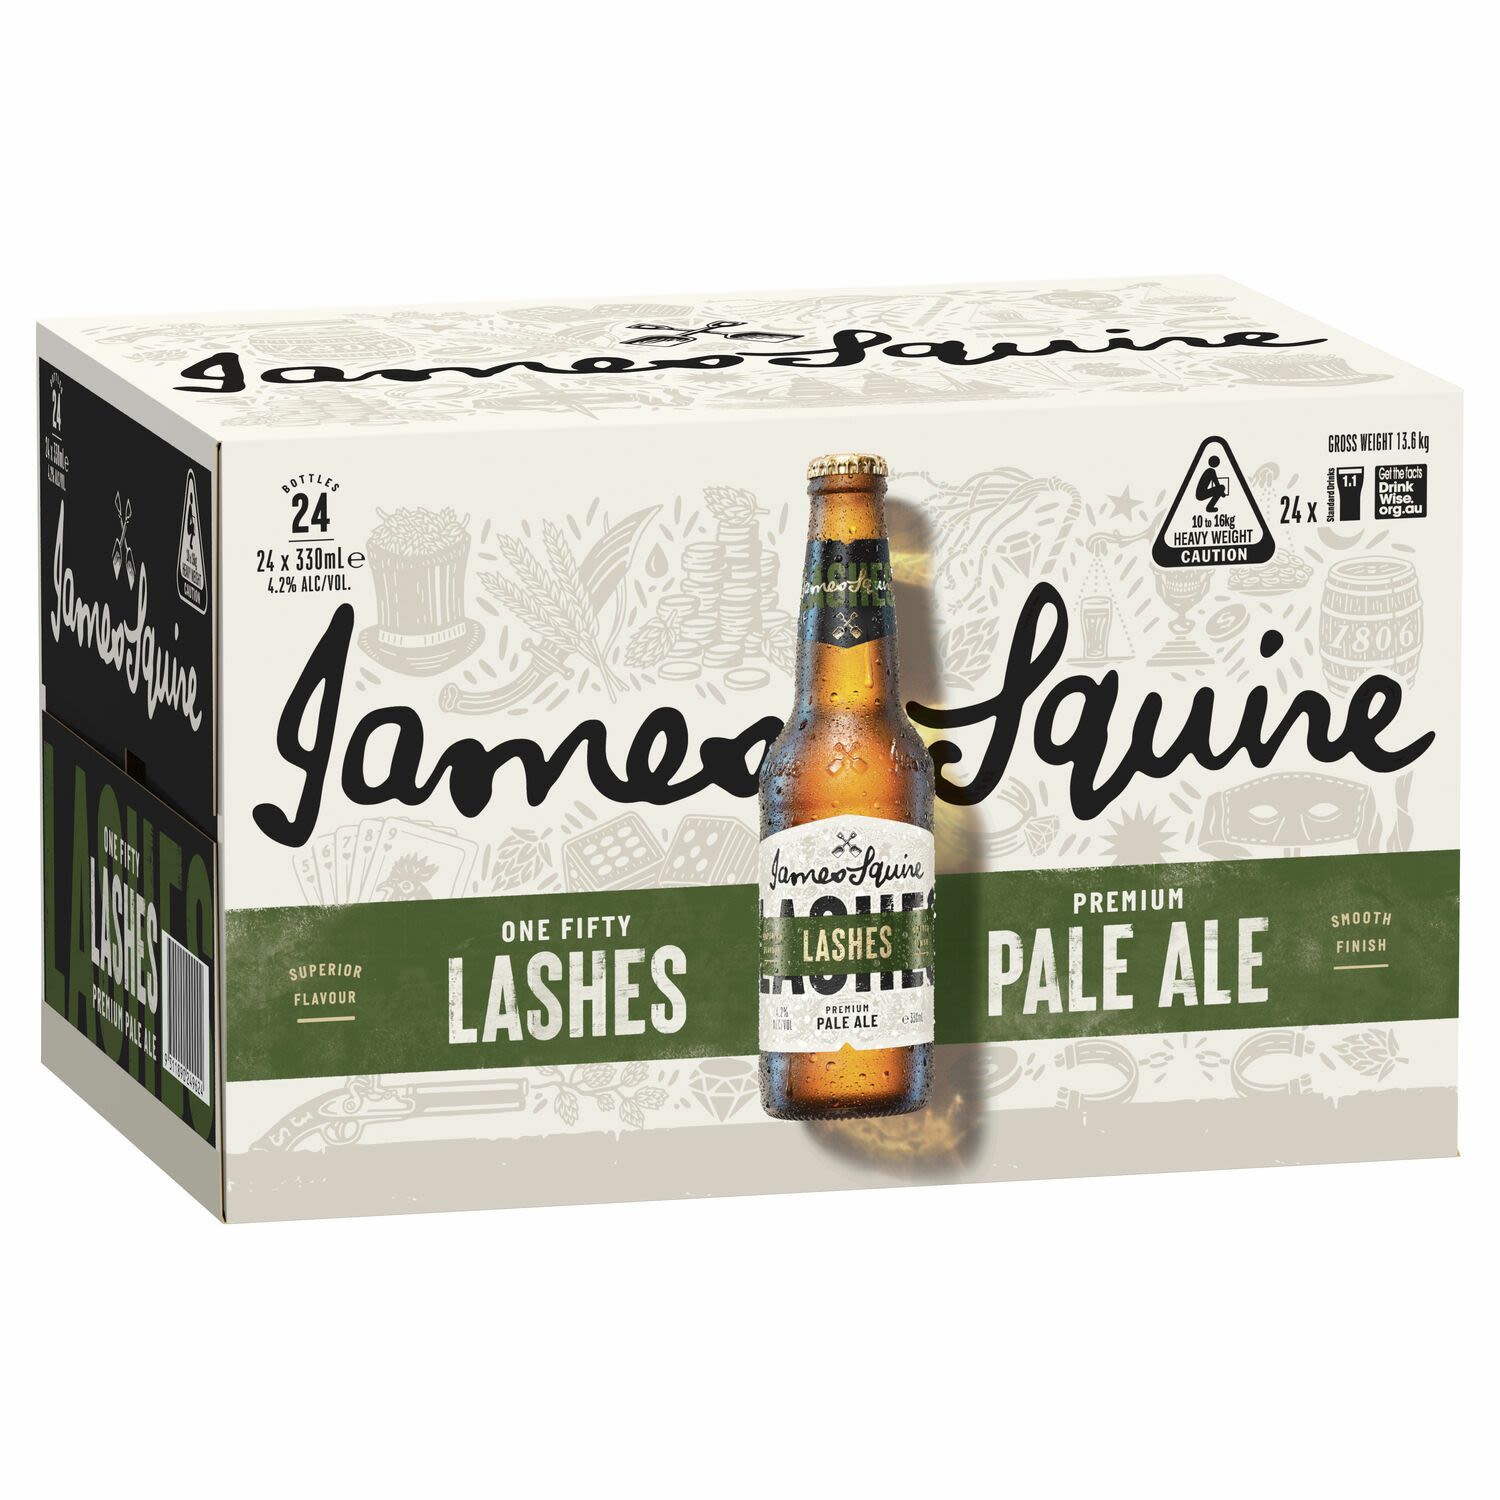 James Squire One Fifty Lashes Pale Ale Bottle 330mL 24 Pack